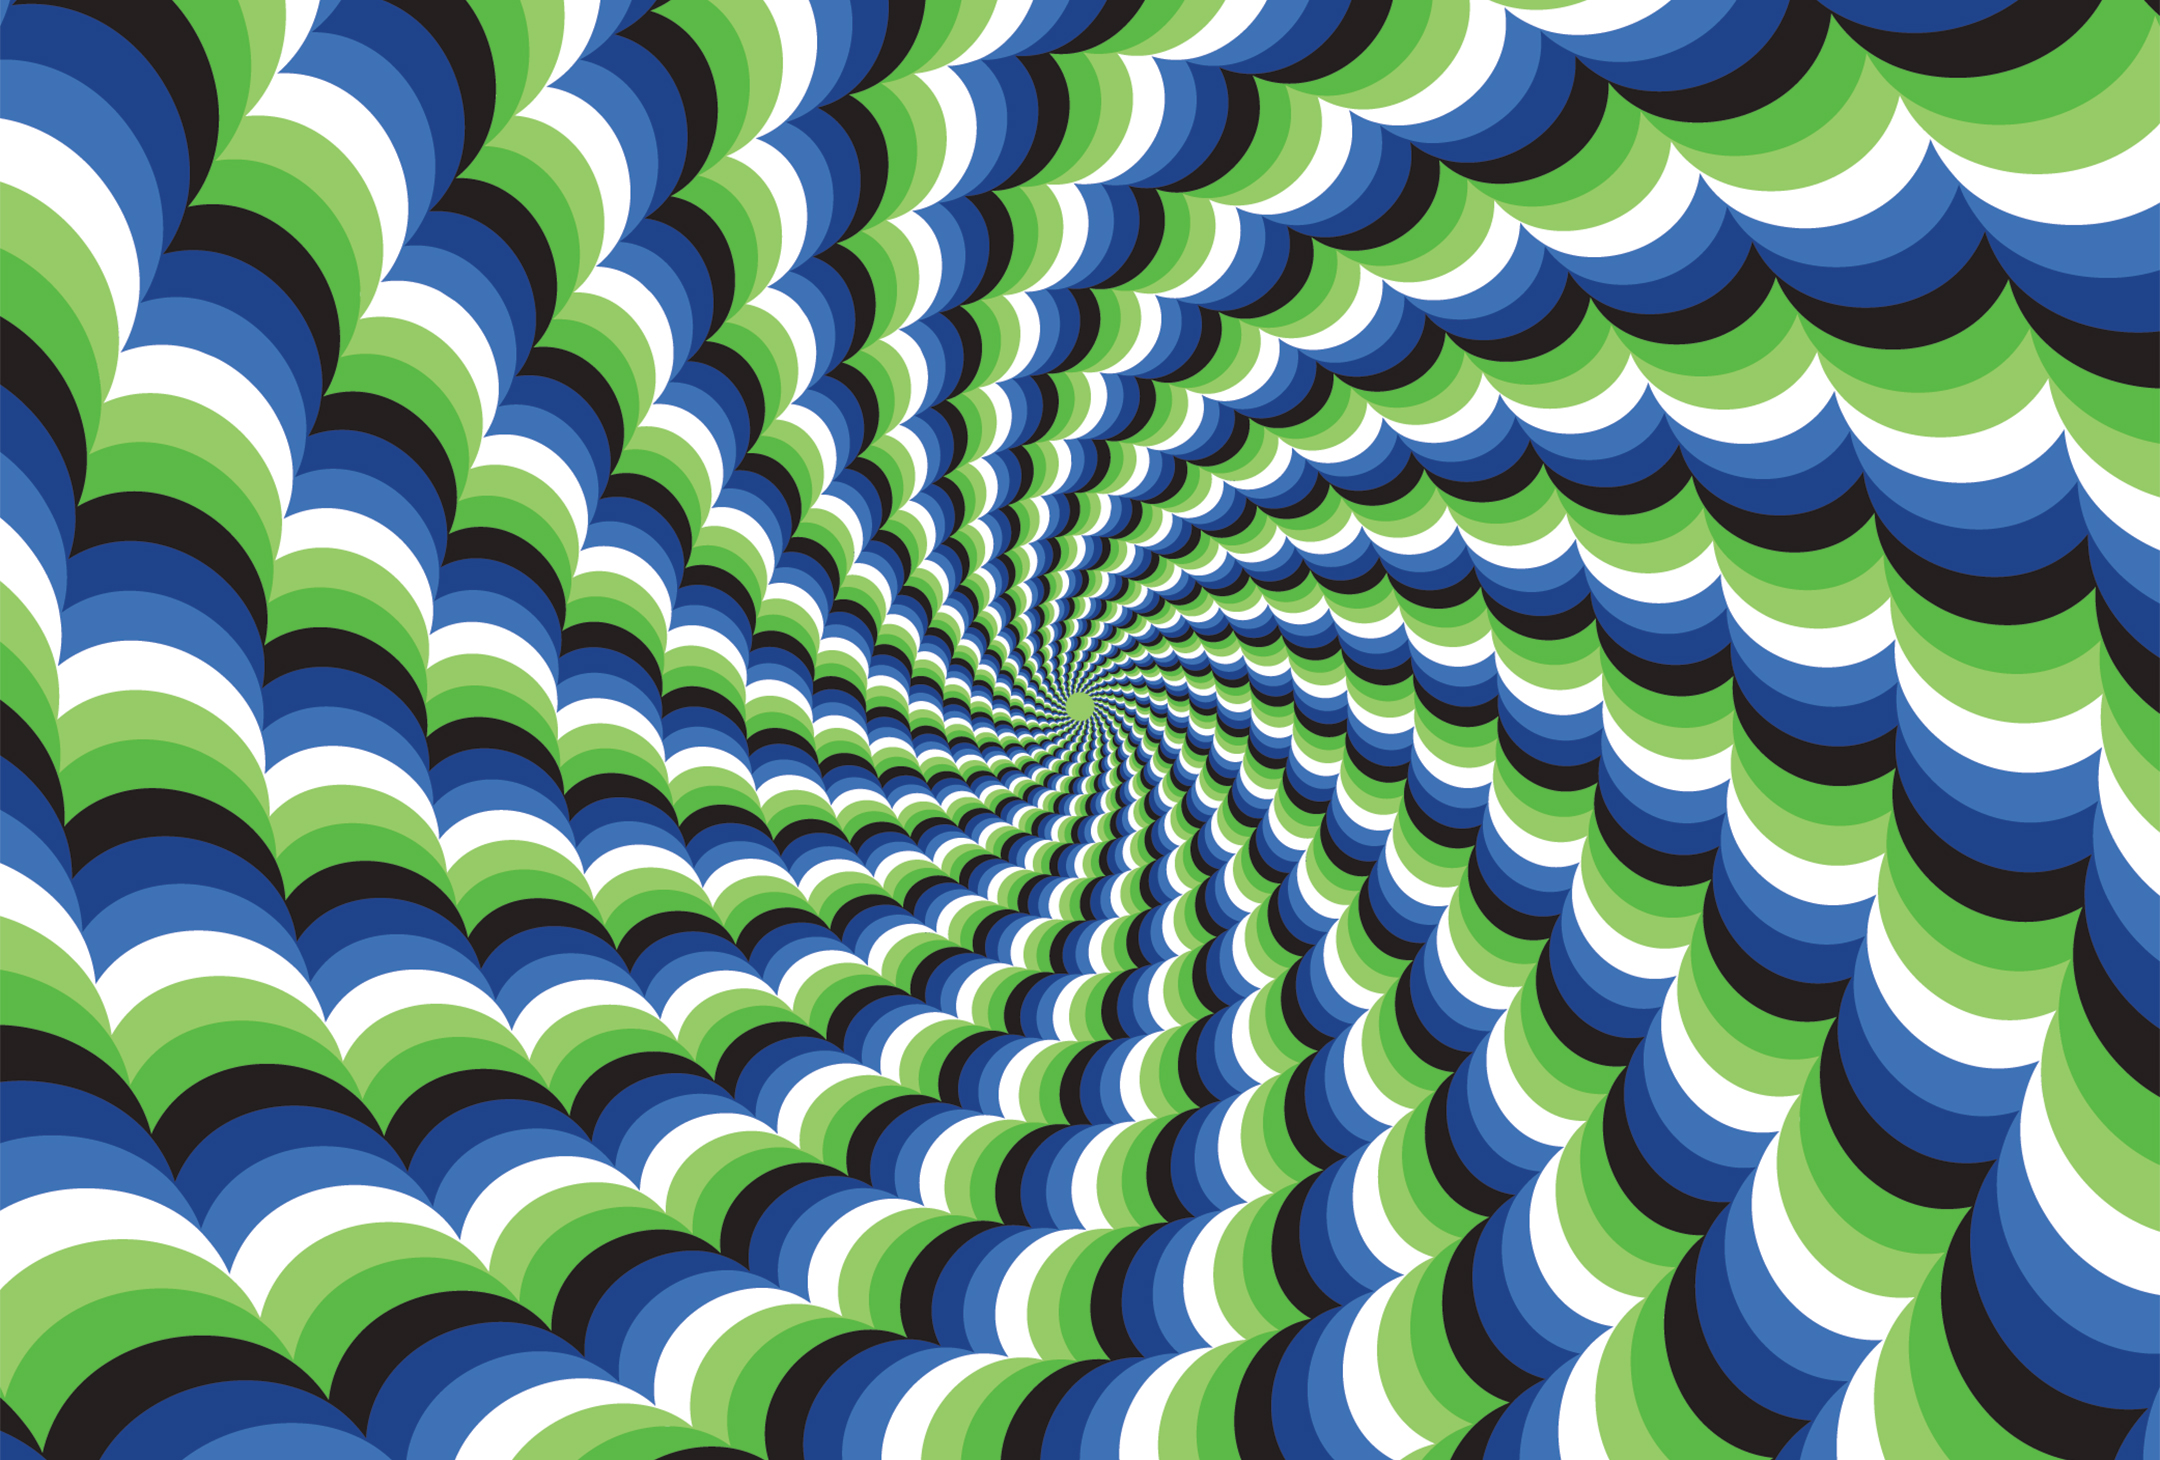 Series of green, white, blue, and black arcs made into an optical illusion to create the sensation that the image is swirling